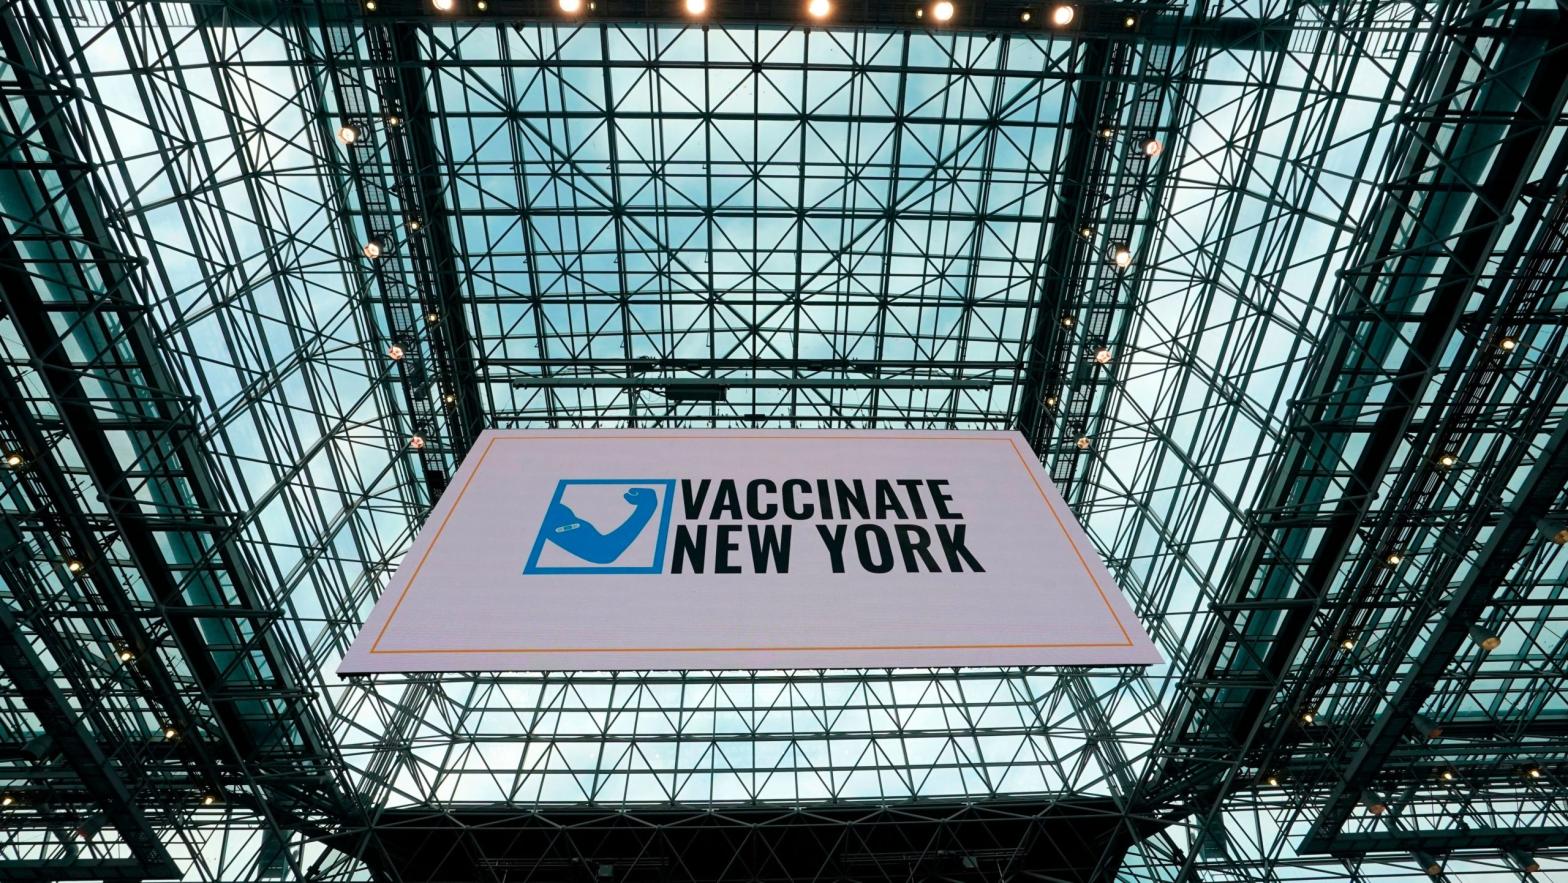 A banner hangs from the ceiling at the Jacob K. Javits Convention Centre on January 13, 2021 during a media tour of the new state vaccination site in New York City.  (Photo: Timothy A. Clary/AFP, Getty Images)